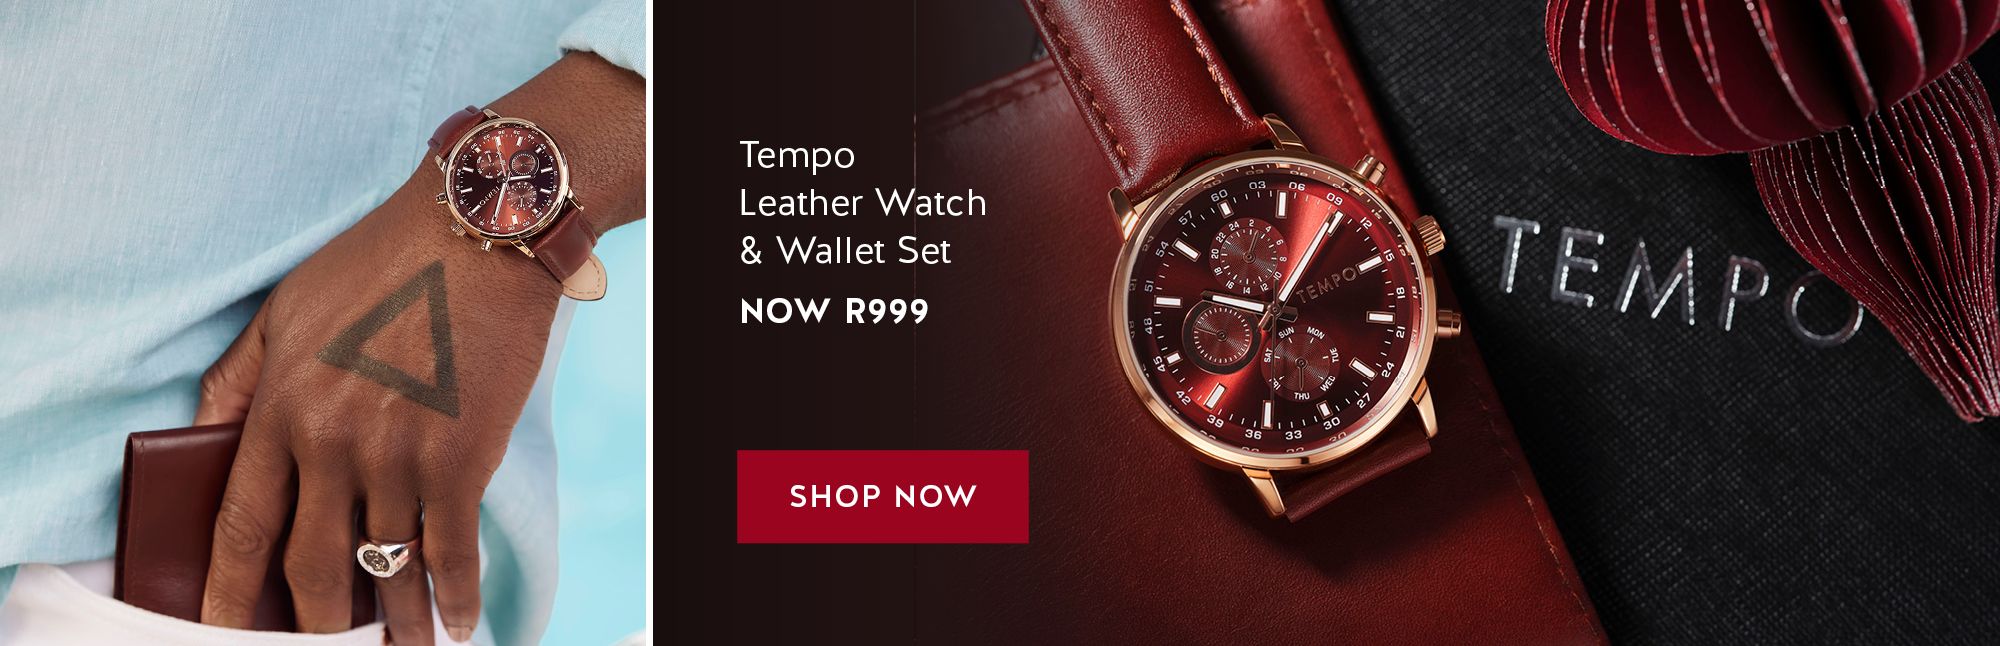 Tempo Leather Watch & Wallet Set, NOW R999